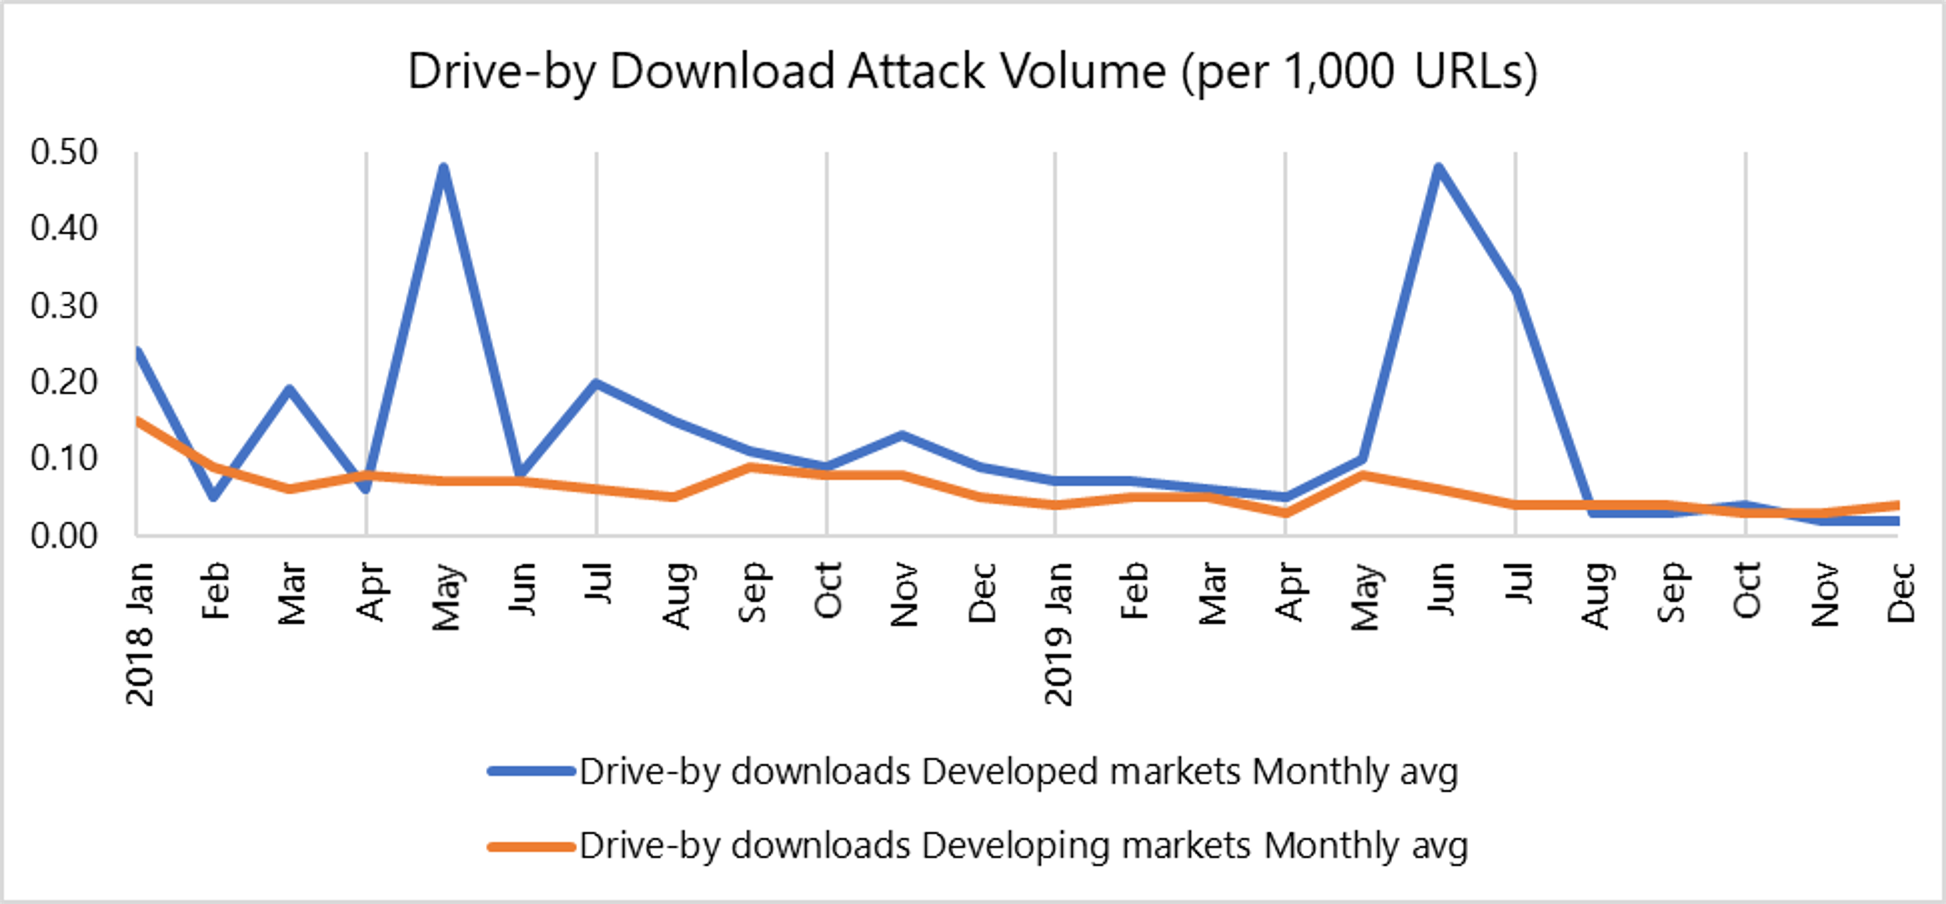 Comparison of drive-by download attacks across developed and developing markets in the region.